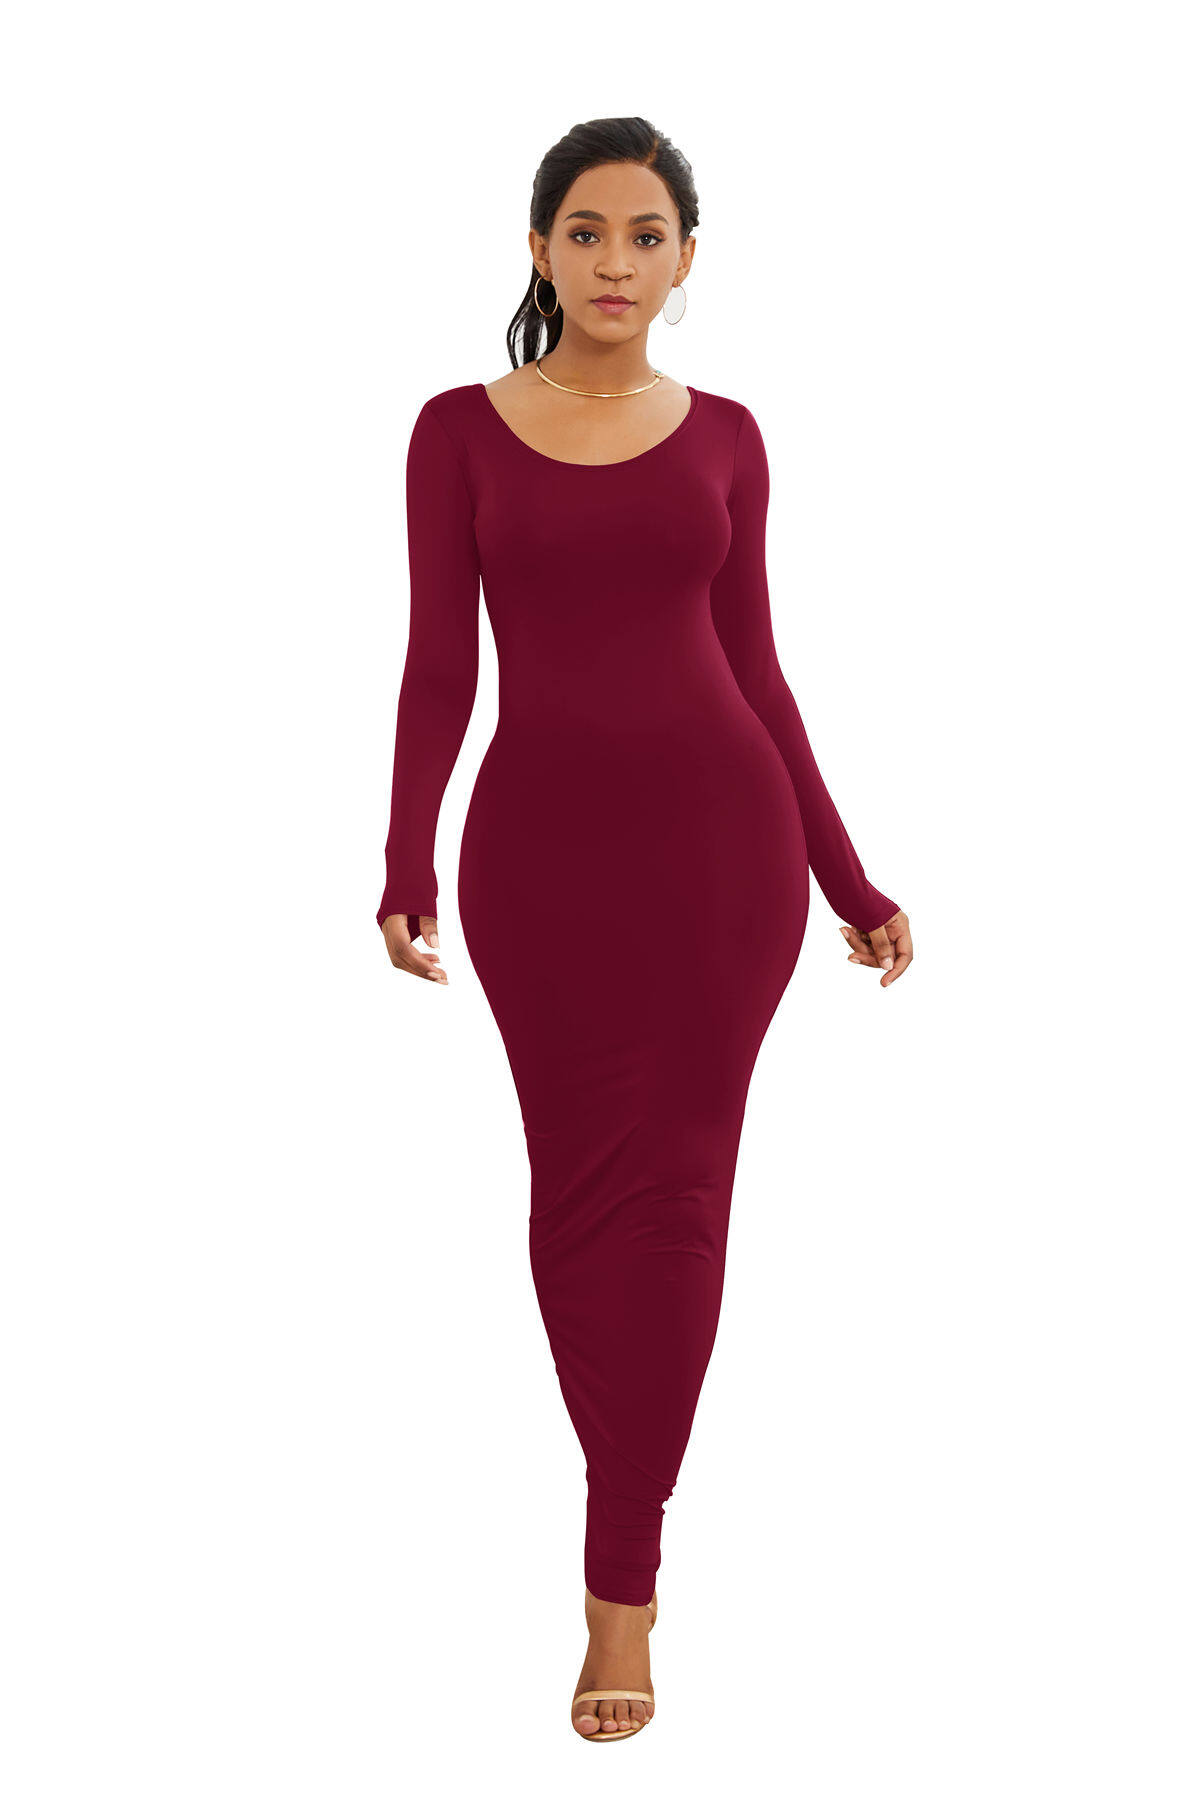 Women's Clothing Casual Cotton Fall Winter Solid Color Pencil Maxi Dress Long Sleeve Bodycon Elegant Ladies Long Party Dress